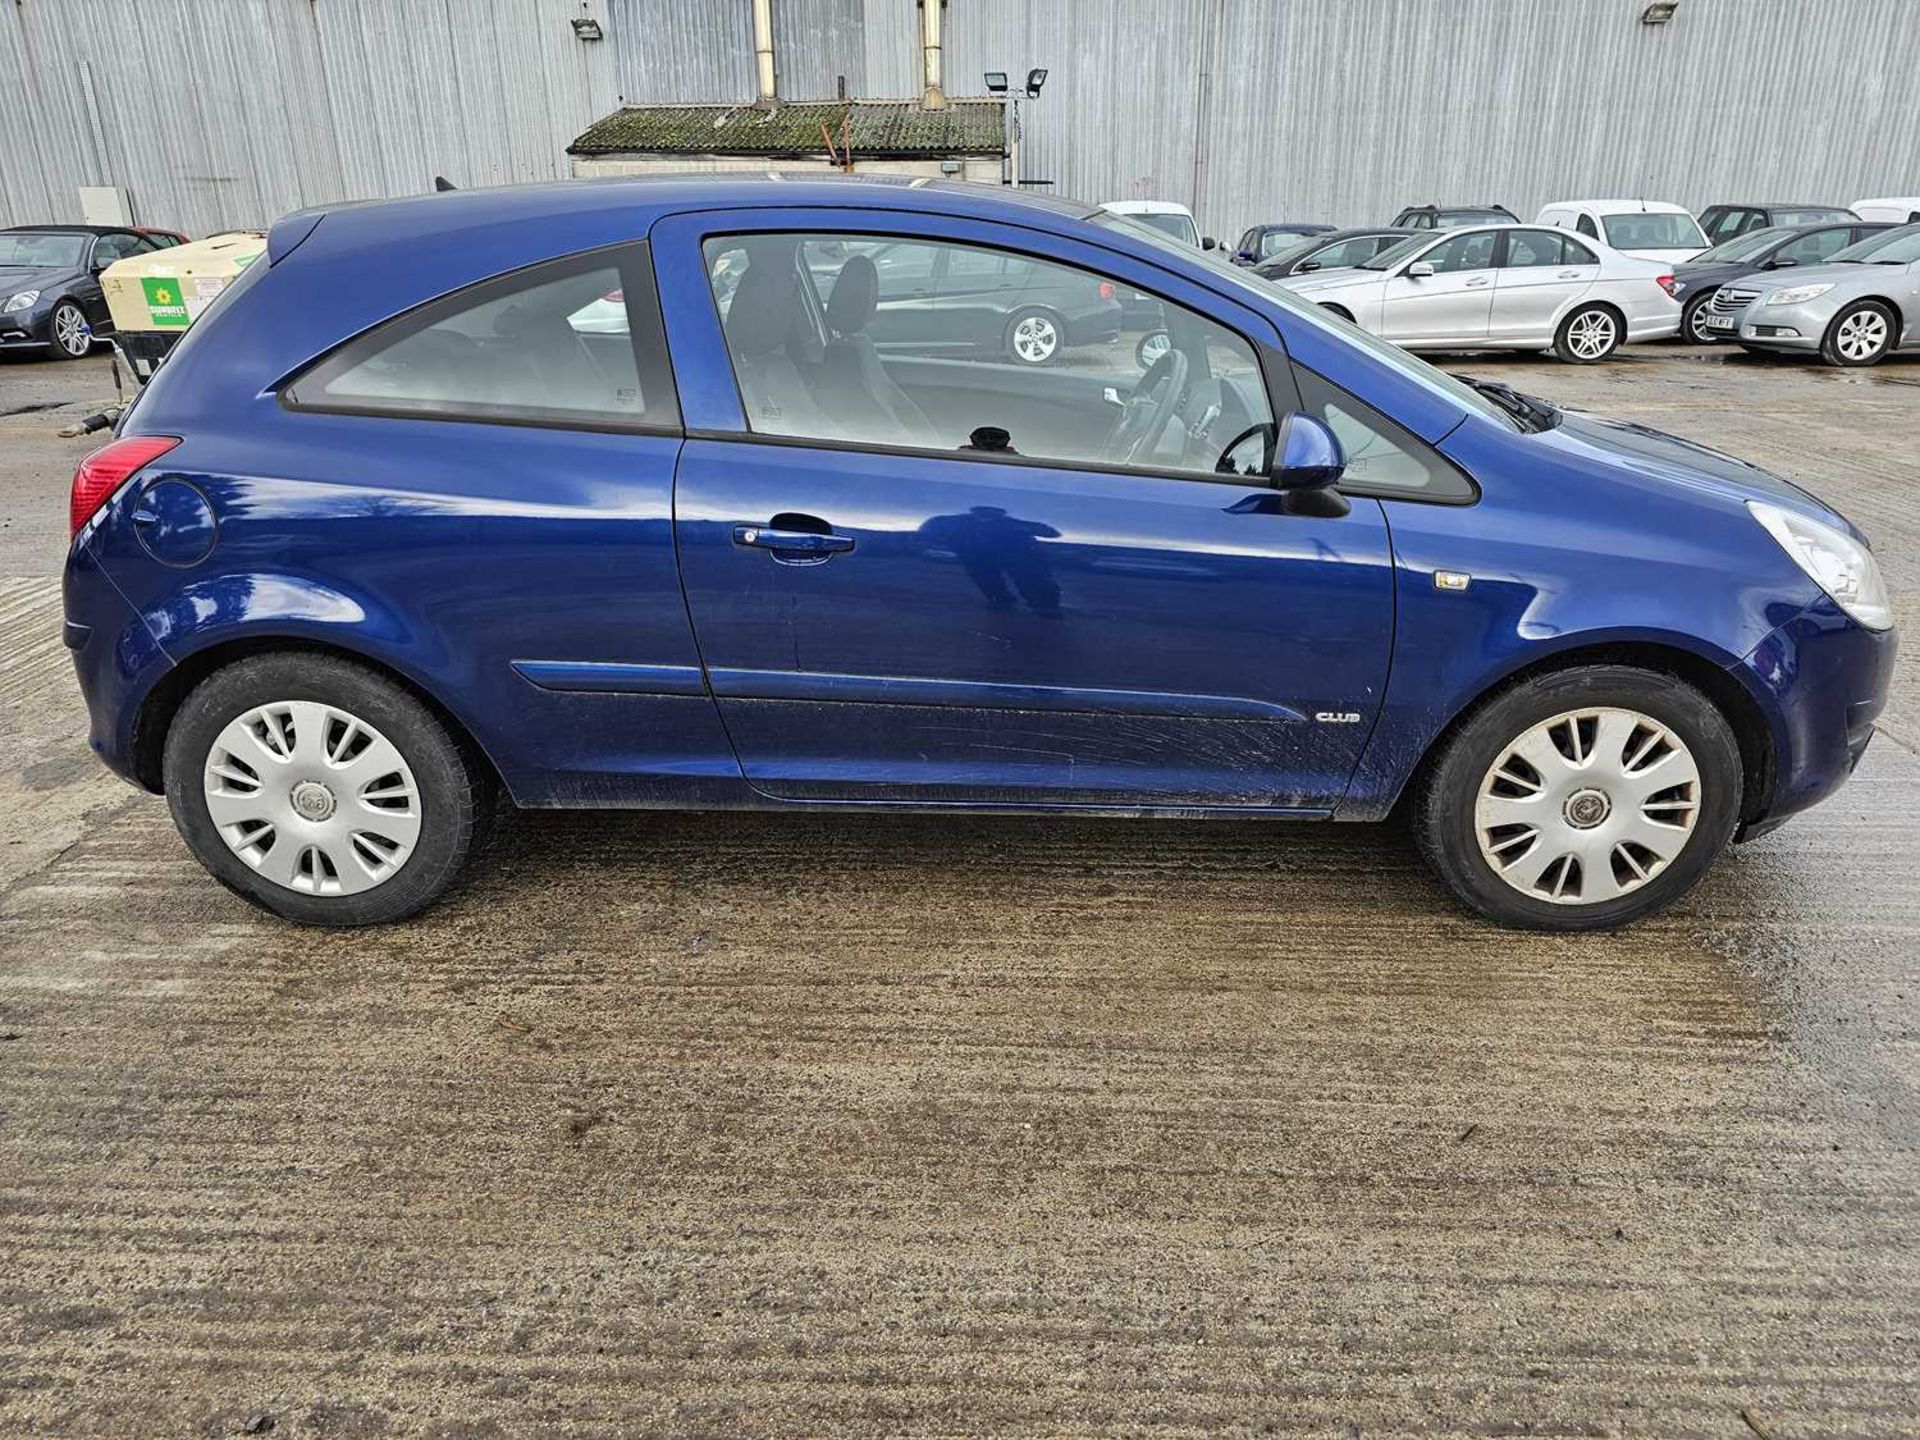 2007 Vauxhall Corsa 1.4, 5 Speed, A/C (Reg. Docs. Available) - Image 2 of 29